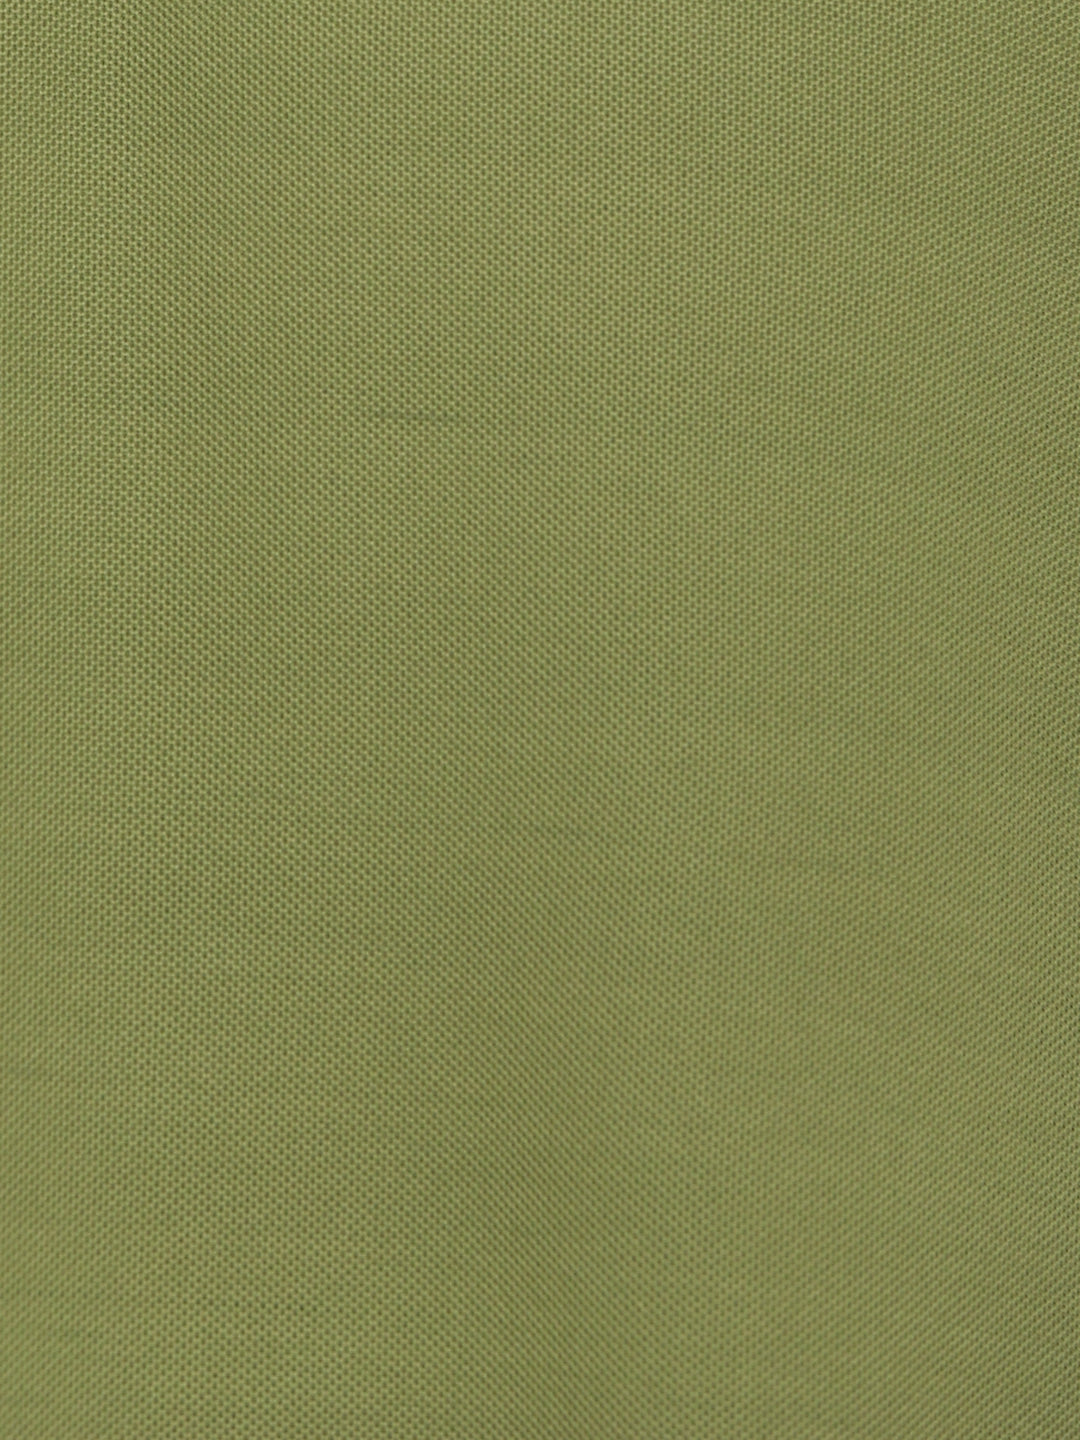 Kooltex Polo T-Shirt For Men - Olive Green